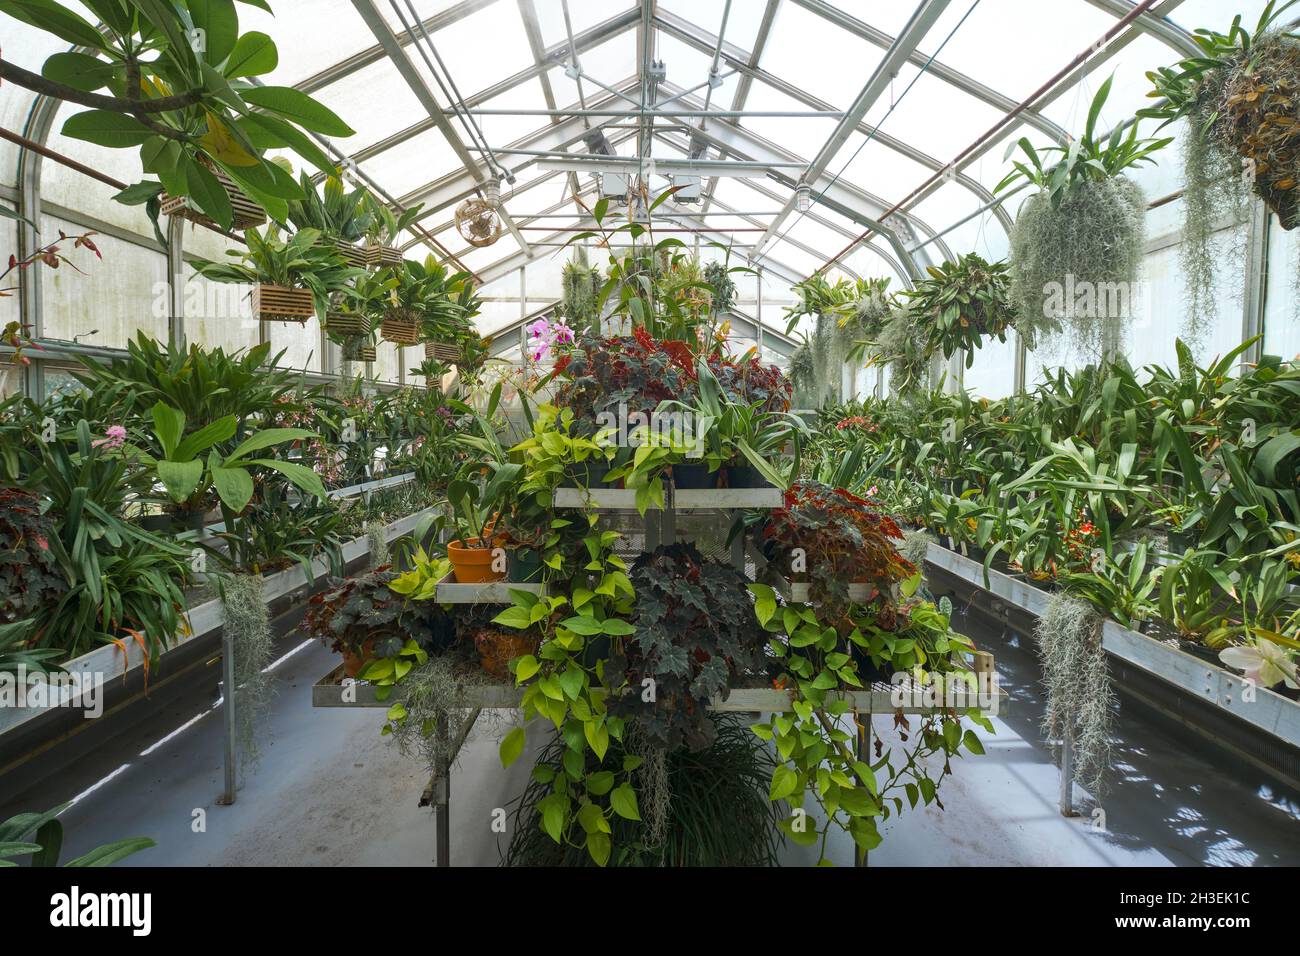 Tropical plants, including begonias, growing in the greenhouse. At Marjorie Merriweather Post's Hillwood Mansion, Museum, Estate and gardens in Washin Stock Photo